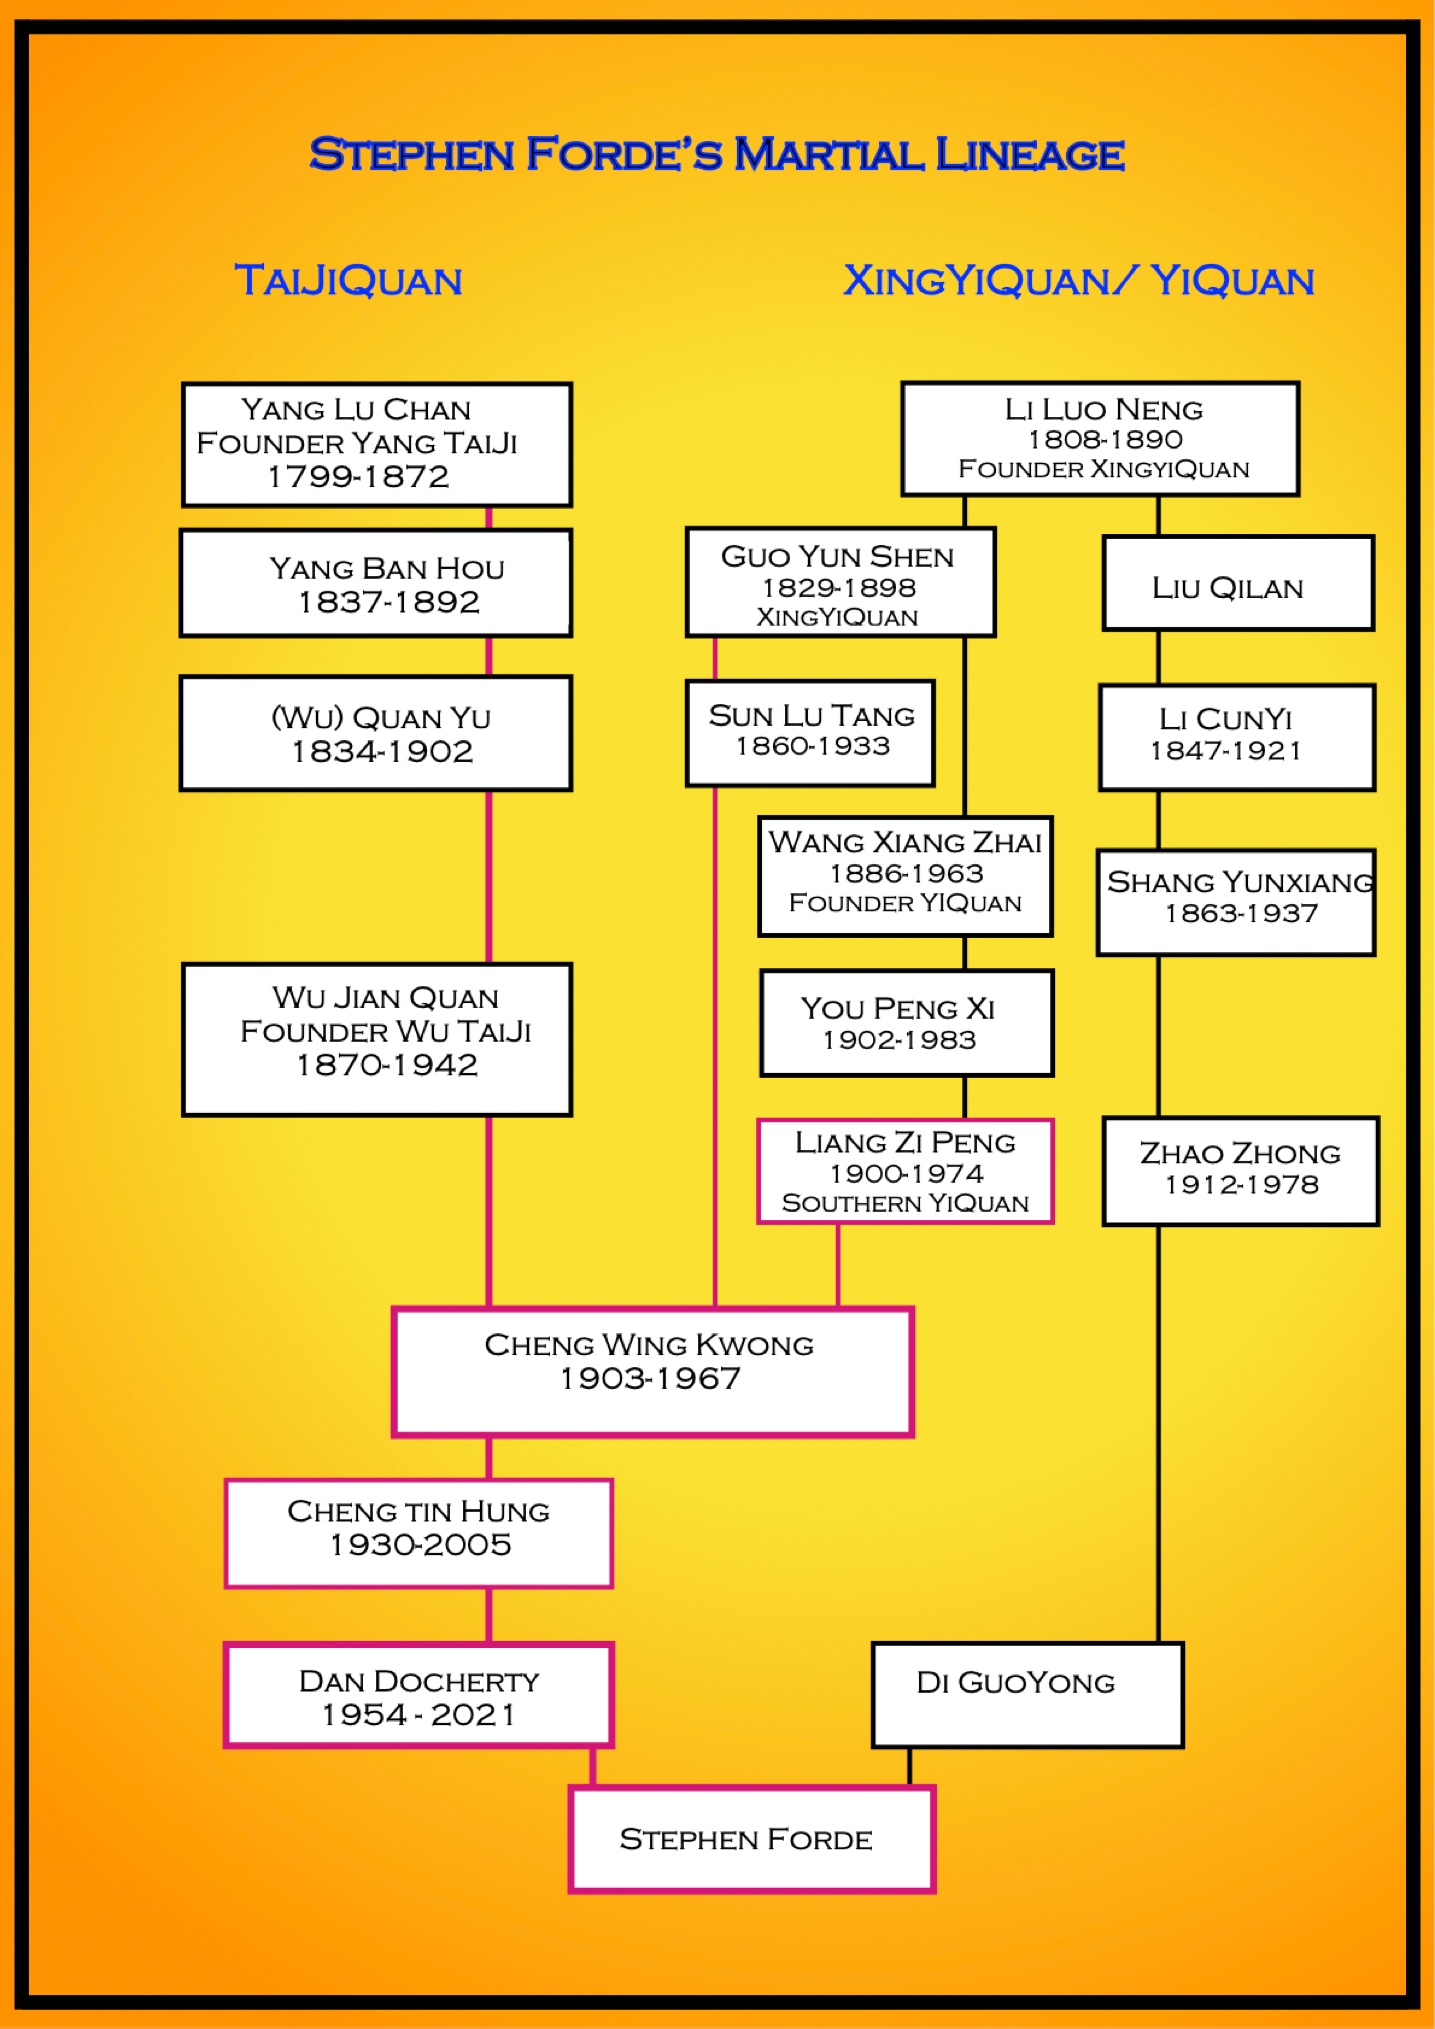 A Diagram of Stephen Forde's TaiJi - XingYi lineage